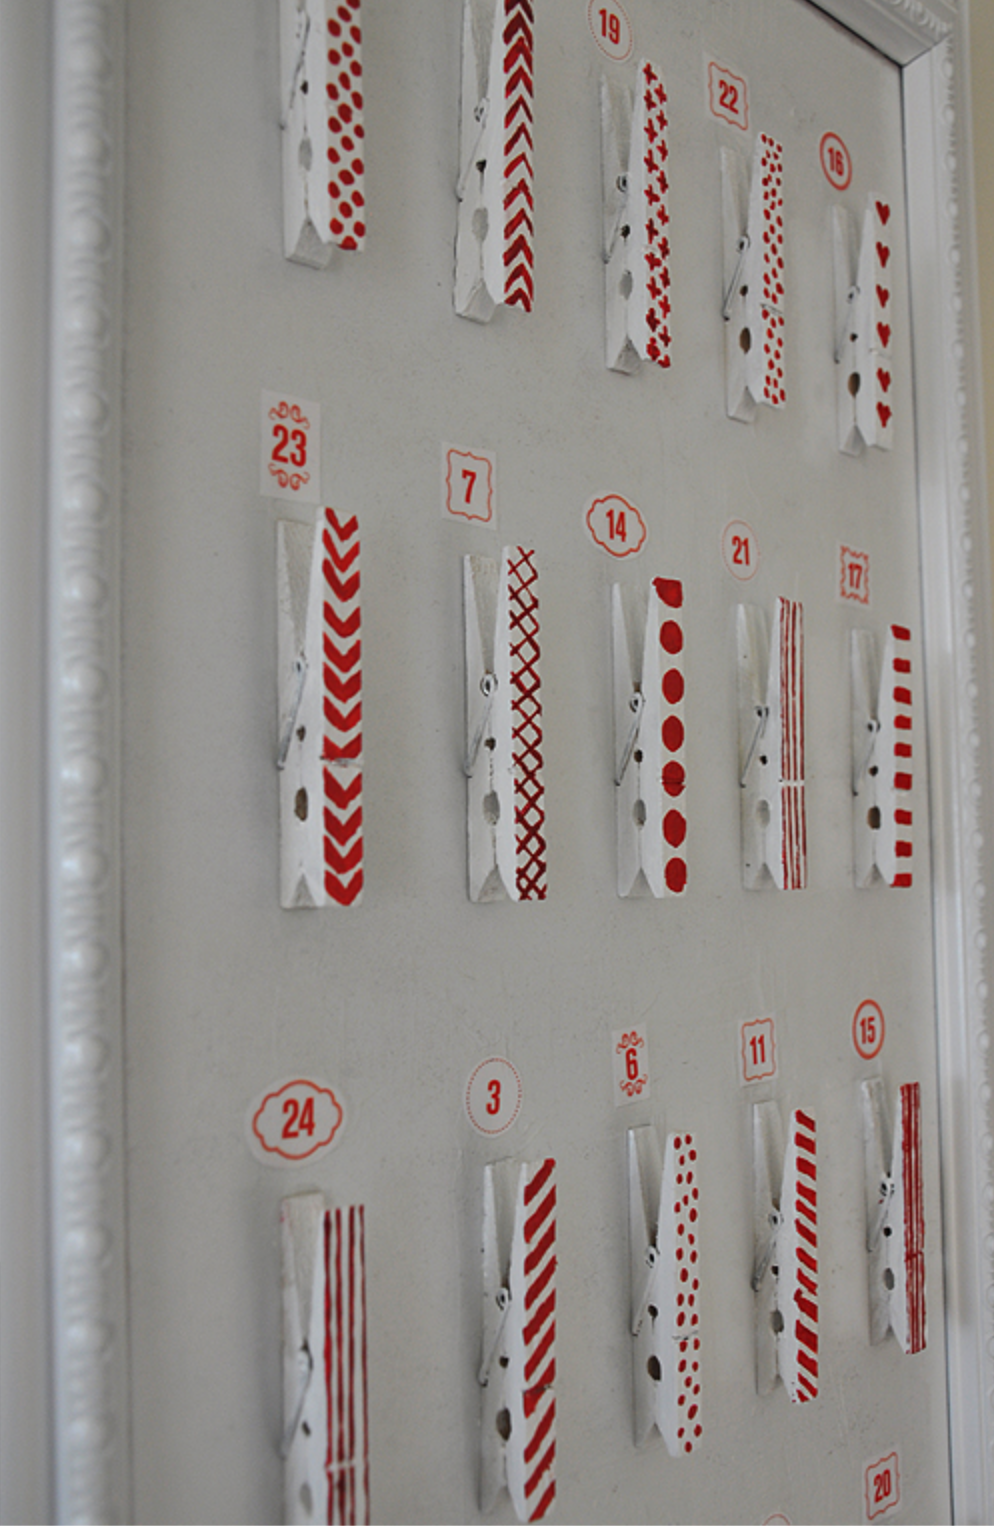 12 DIY Clothespin Crafts And Decorations To Try - Shelterness